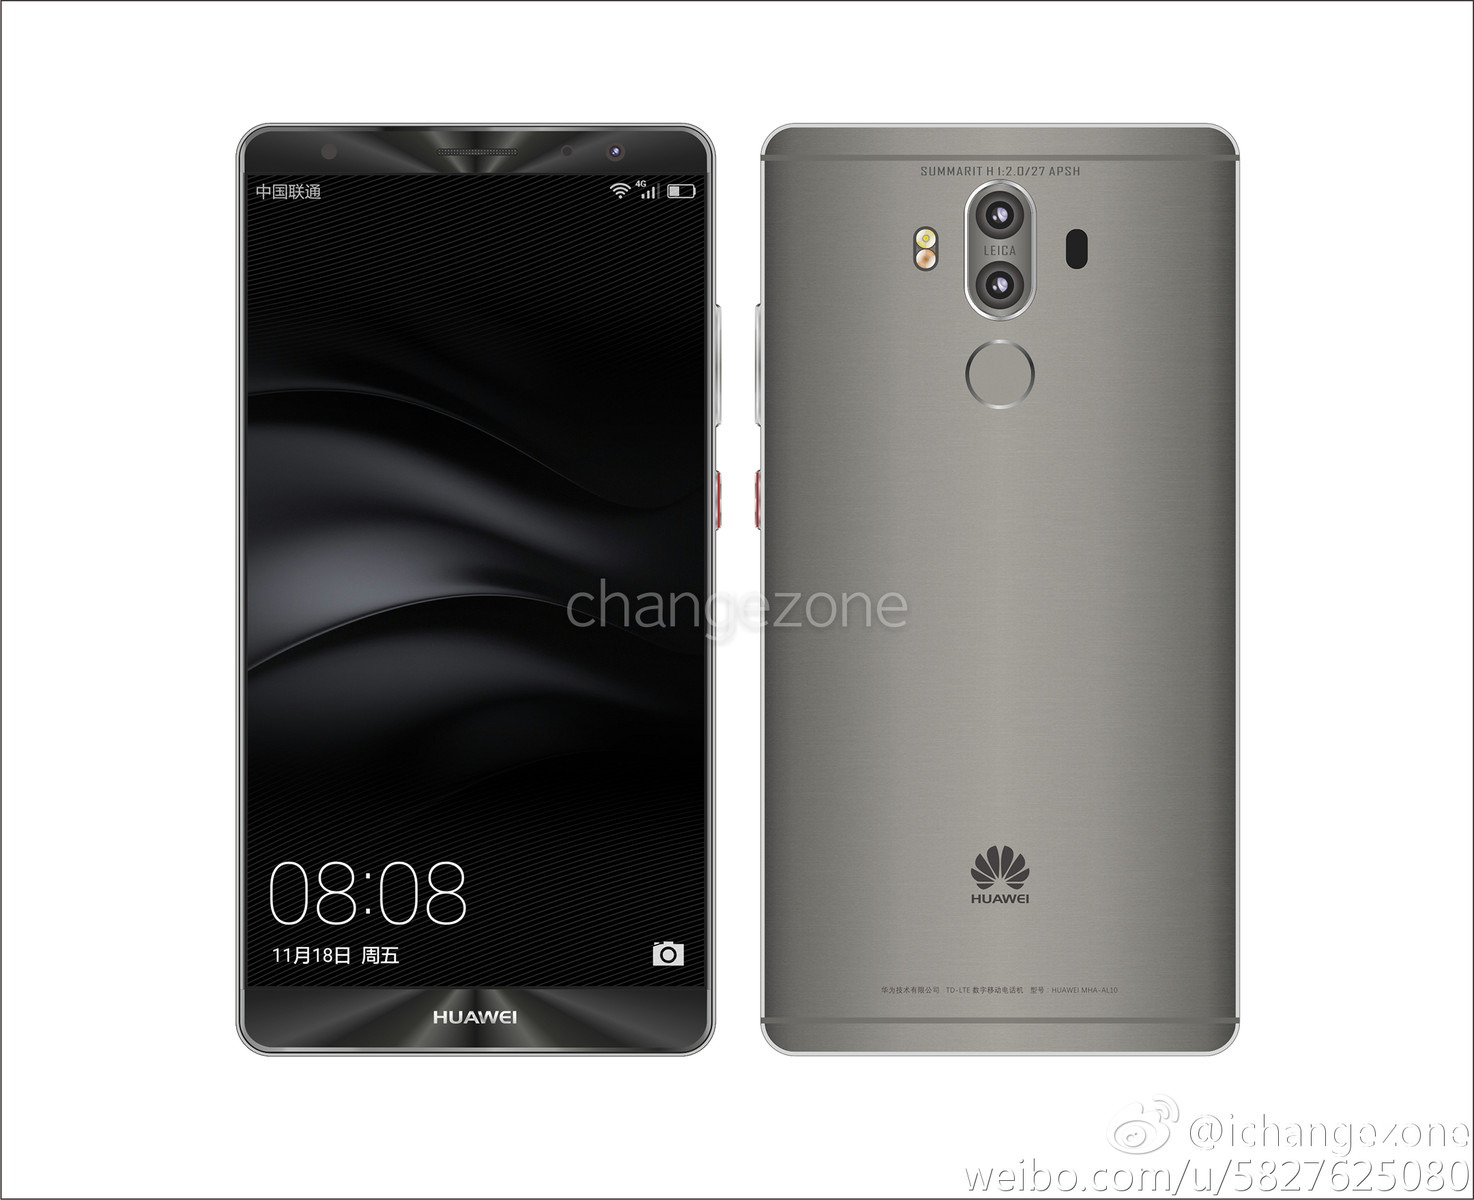 Schijn horizon Vorige Huawei Mate 9 leak: Pictures, pricing and planned configurations -  NotebookCheck.net News